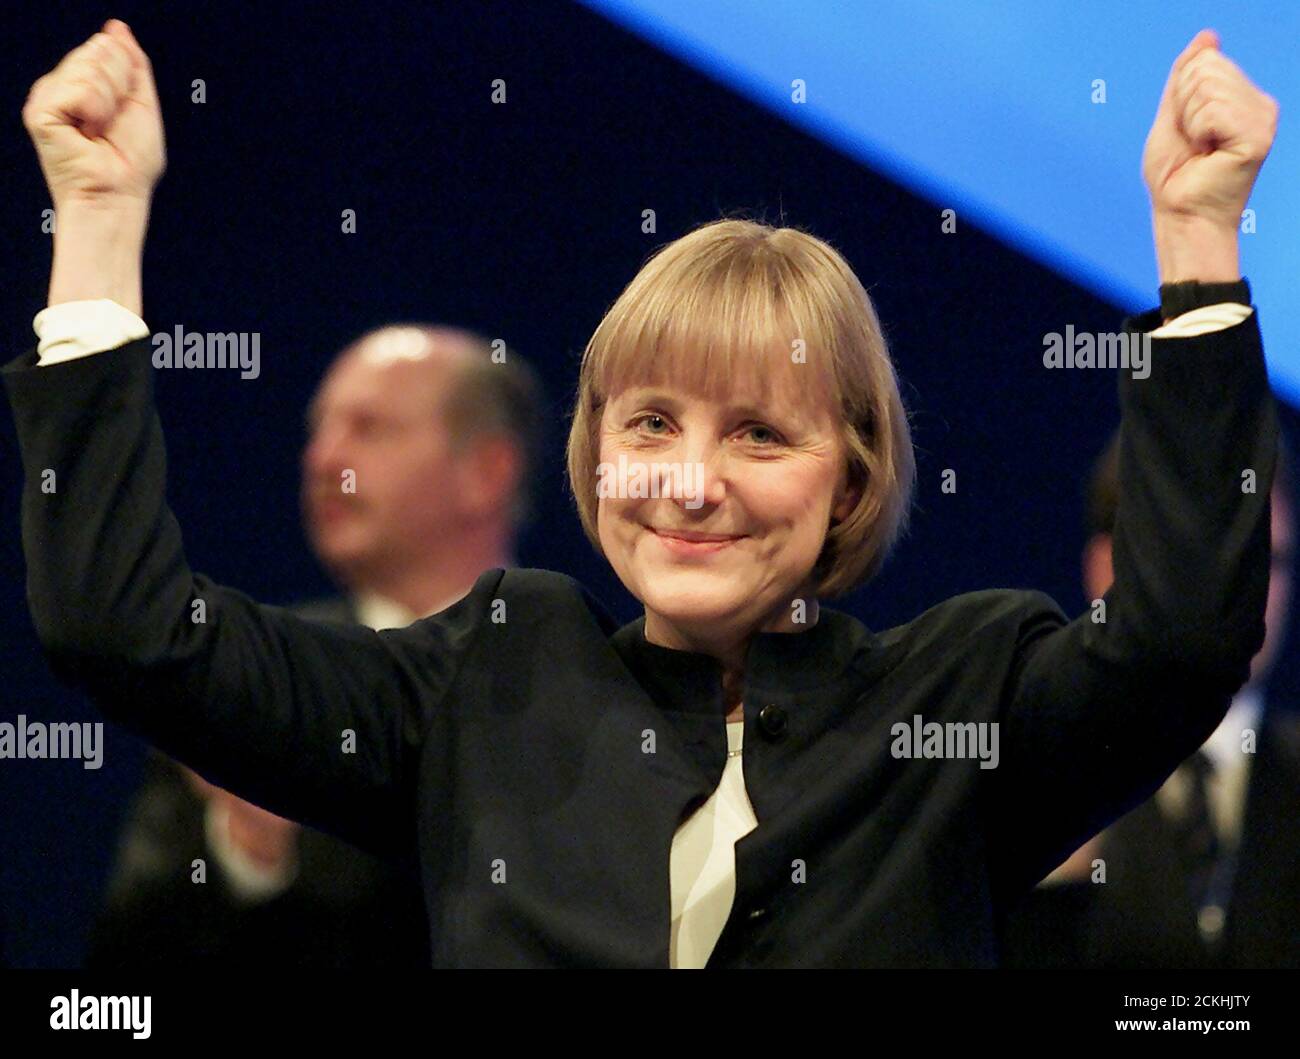 Angela Merkel, leader of the conservative Christian Democratic Union (CDU) reacts on the jubilation of about 1000 delegates after her opening speech of the 14th general party meeting of the CDU in Dresden, December 3, 2001. The conservatives, struggling to rebuild after a funding scandal around former chancellor Helmut Kohl and trailing behind Schroeder in the polls, insist the event will focus on immigration and Social Democratic chancellor Schroeder's failure to cut unemployment. REUTERS/Arnd Wiegmann REUTERS  KP/FMS Stock Photo